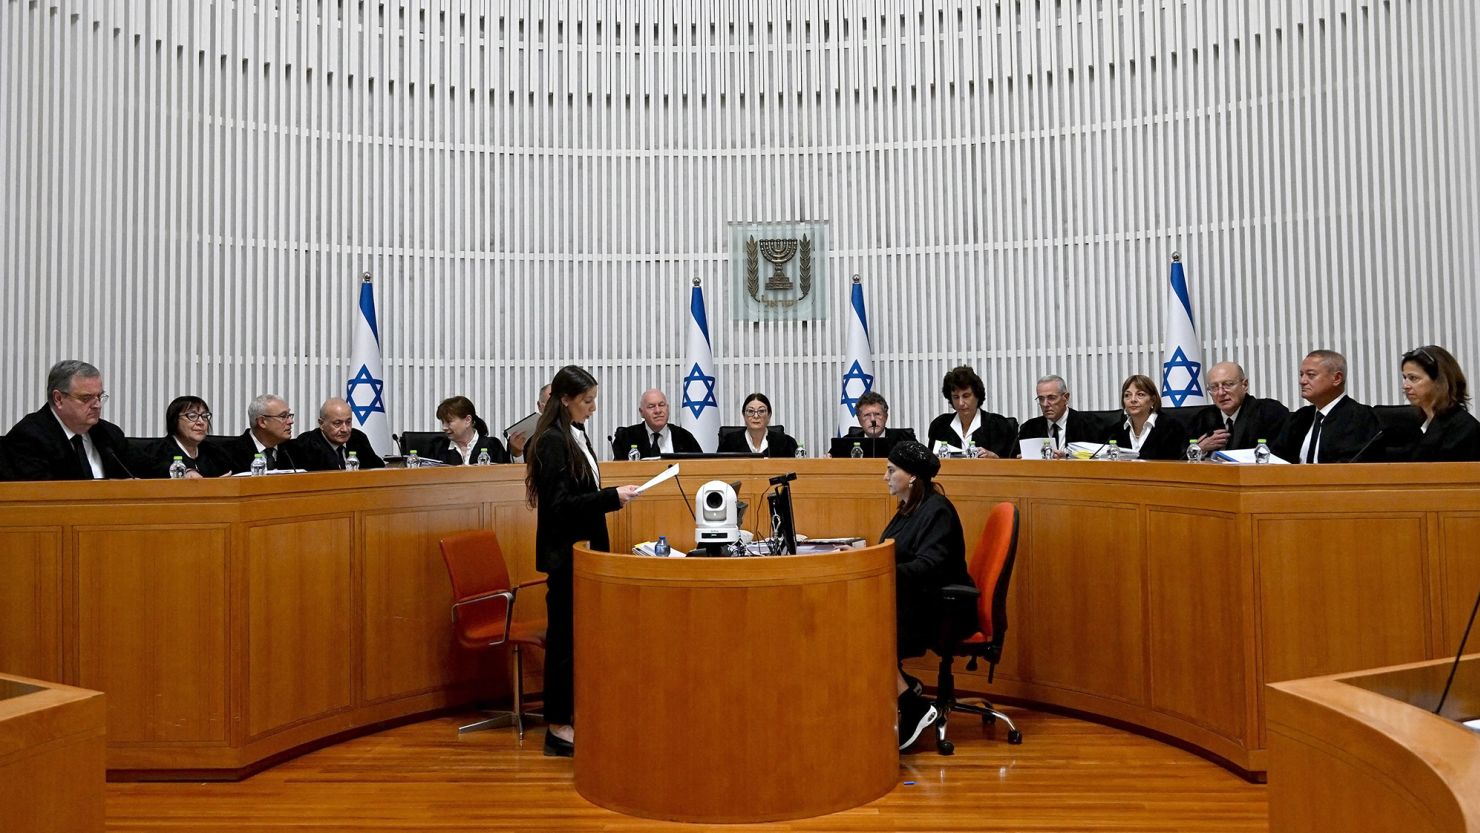 President of the Israeli Supreme Court Esther Hayut and all fifteen judges assemble to hear petitions against the 'reasonableness clause' at the court premises in Jerusalem, on September 12, 2023. The petitions call to strike down the clause passed by Israel's hardline government through parliament in July, a major element of a controversial judicial overhaul that has triggered mass protests and divided the nation. The amendment limits the powers of the top court to review and sometimes overturn government decisions, which opponents say paves the way to authoritarianism. (Photo by DEBBIE HILL / POOL / AFP) (Photo by DEBBIE HILL/POOL/AFP via Getty Images)